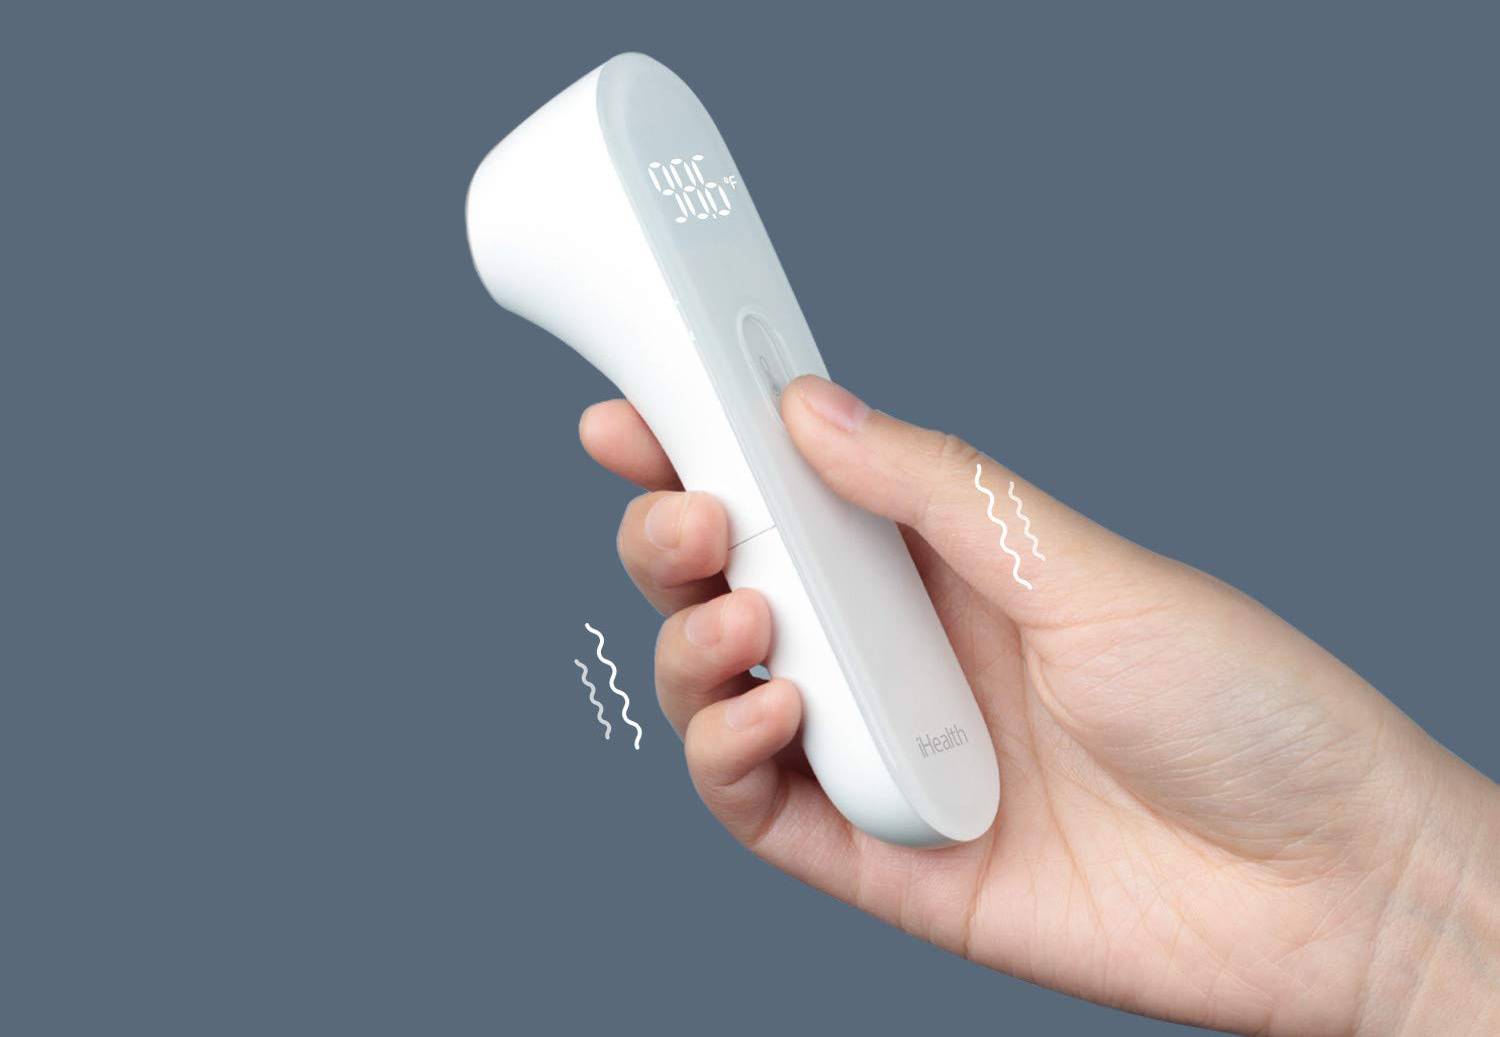 1 million other folks bought this $60 forehead thermometer in 2020 – now it’s $25 at Amazon